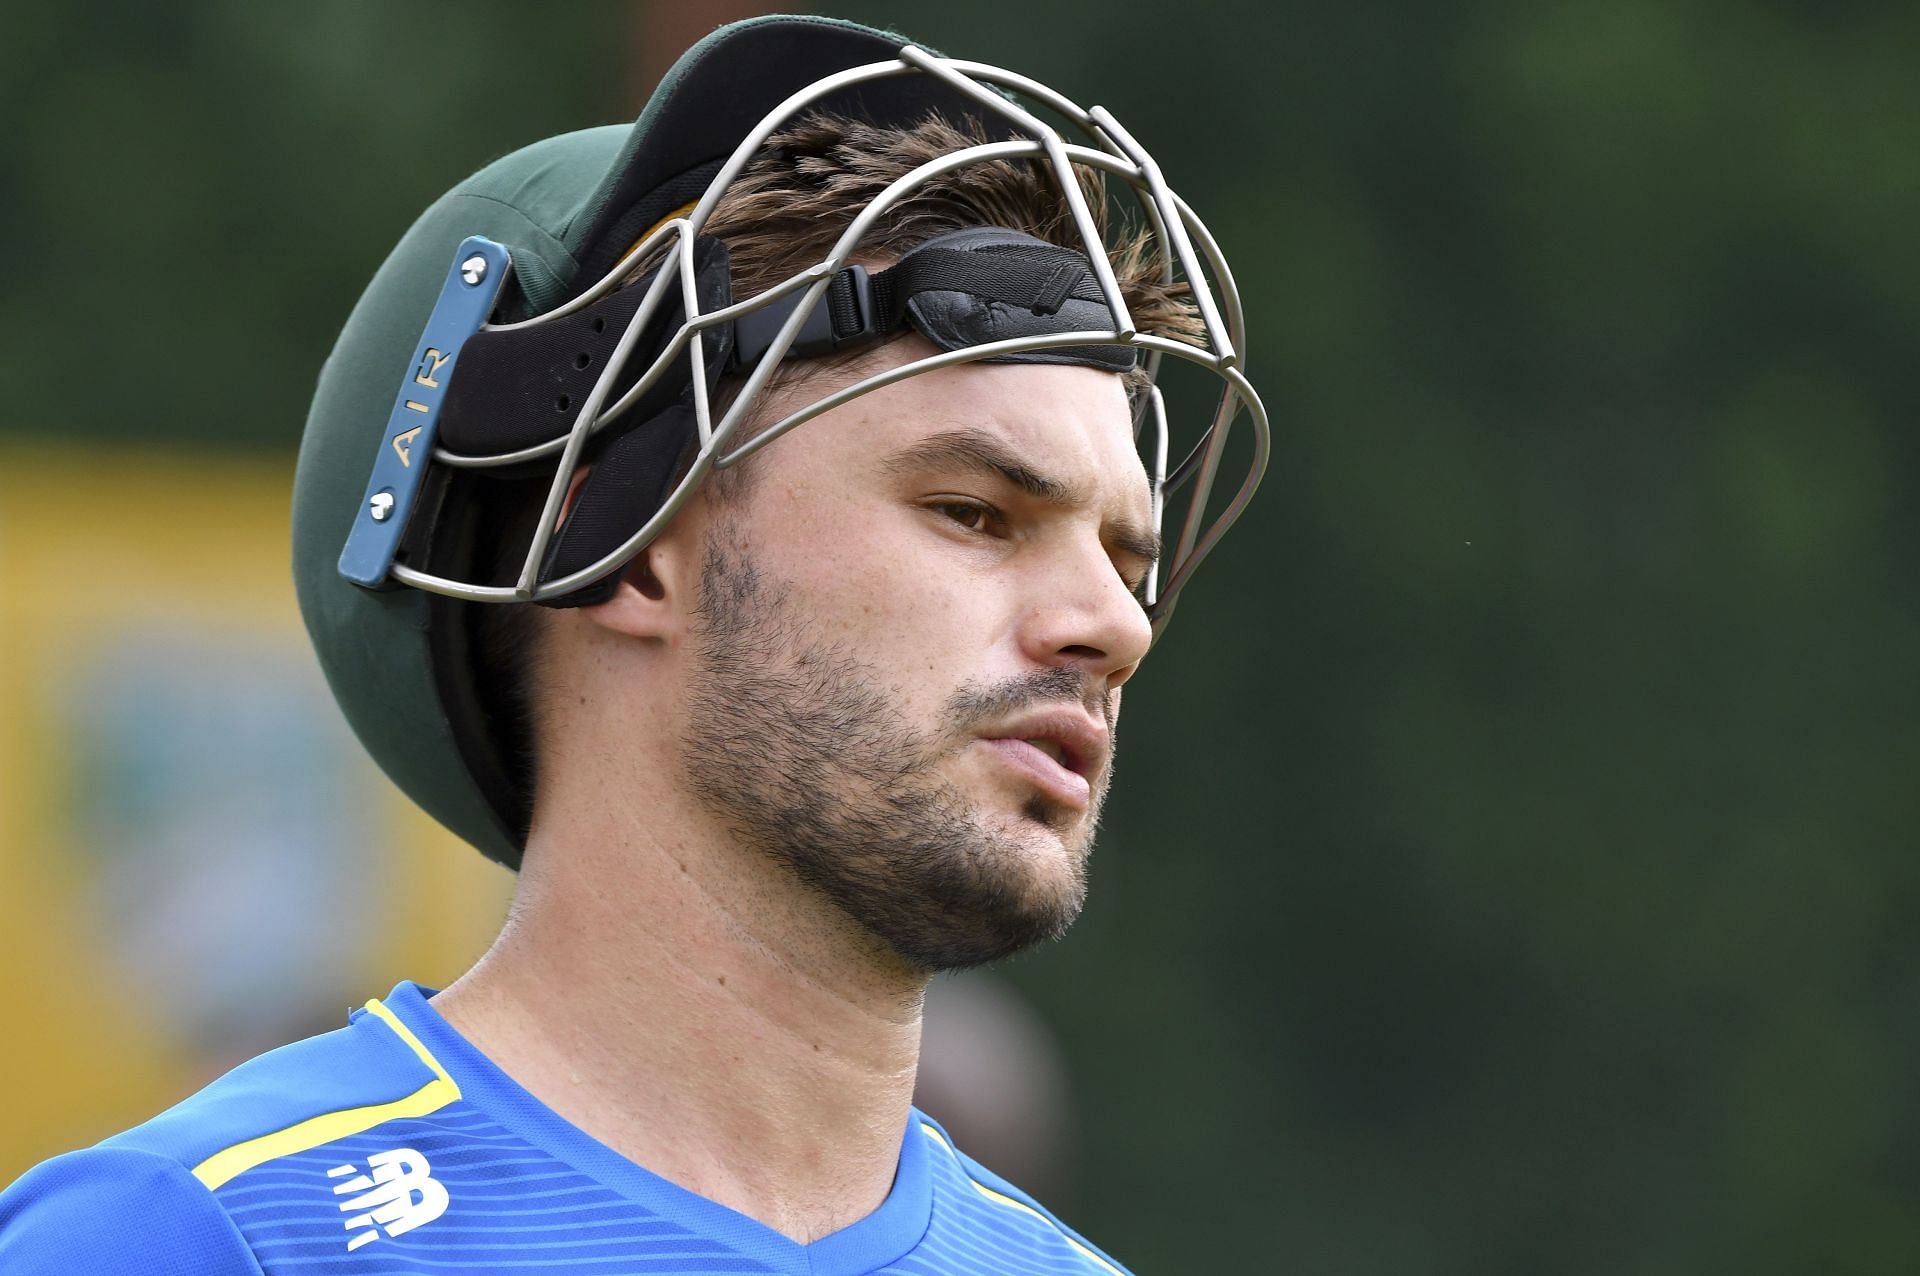 South Africa's Aiden Markram to miss the remaining T20Is against India.